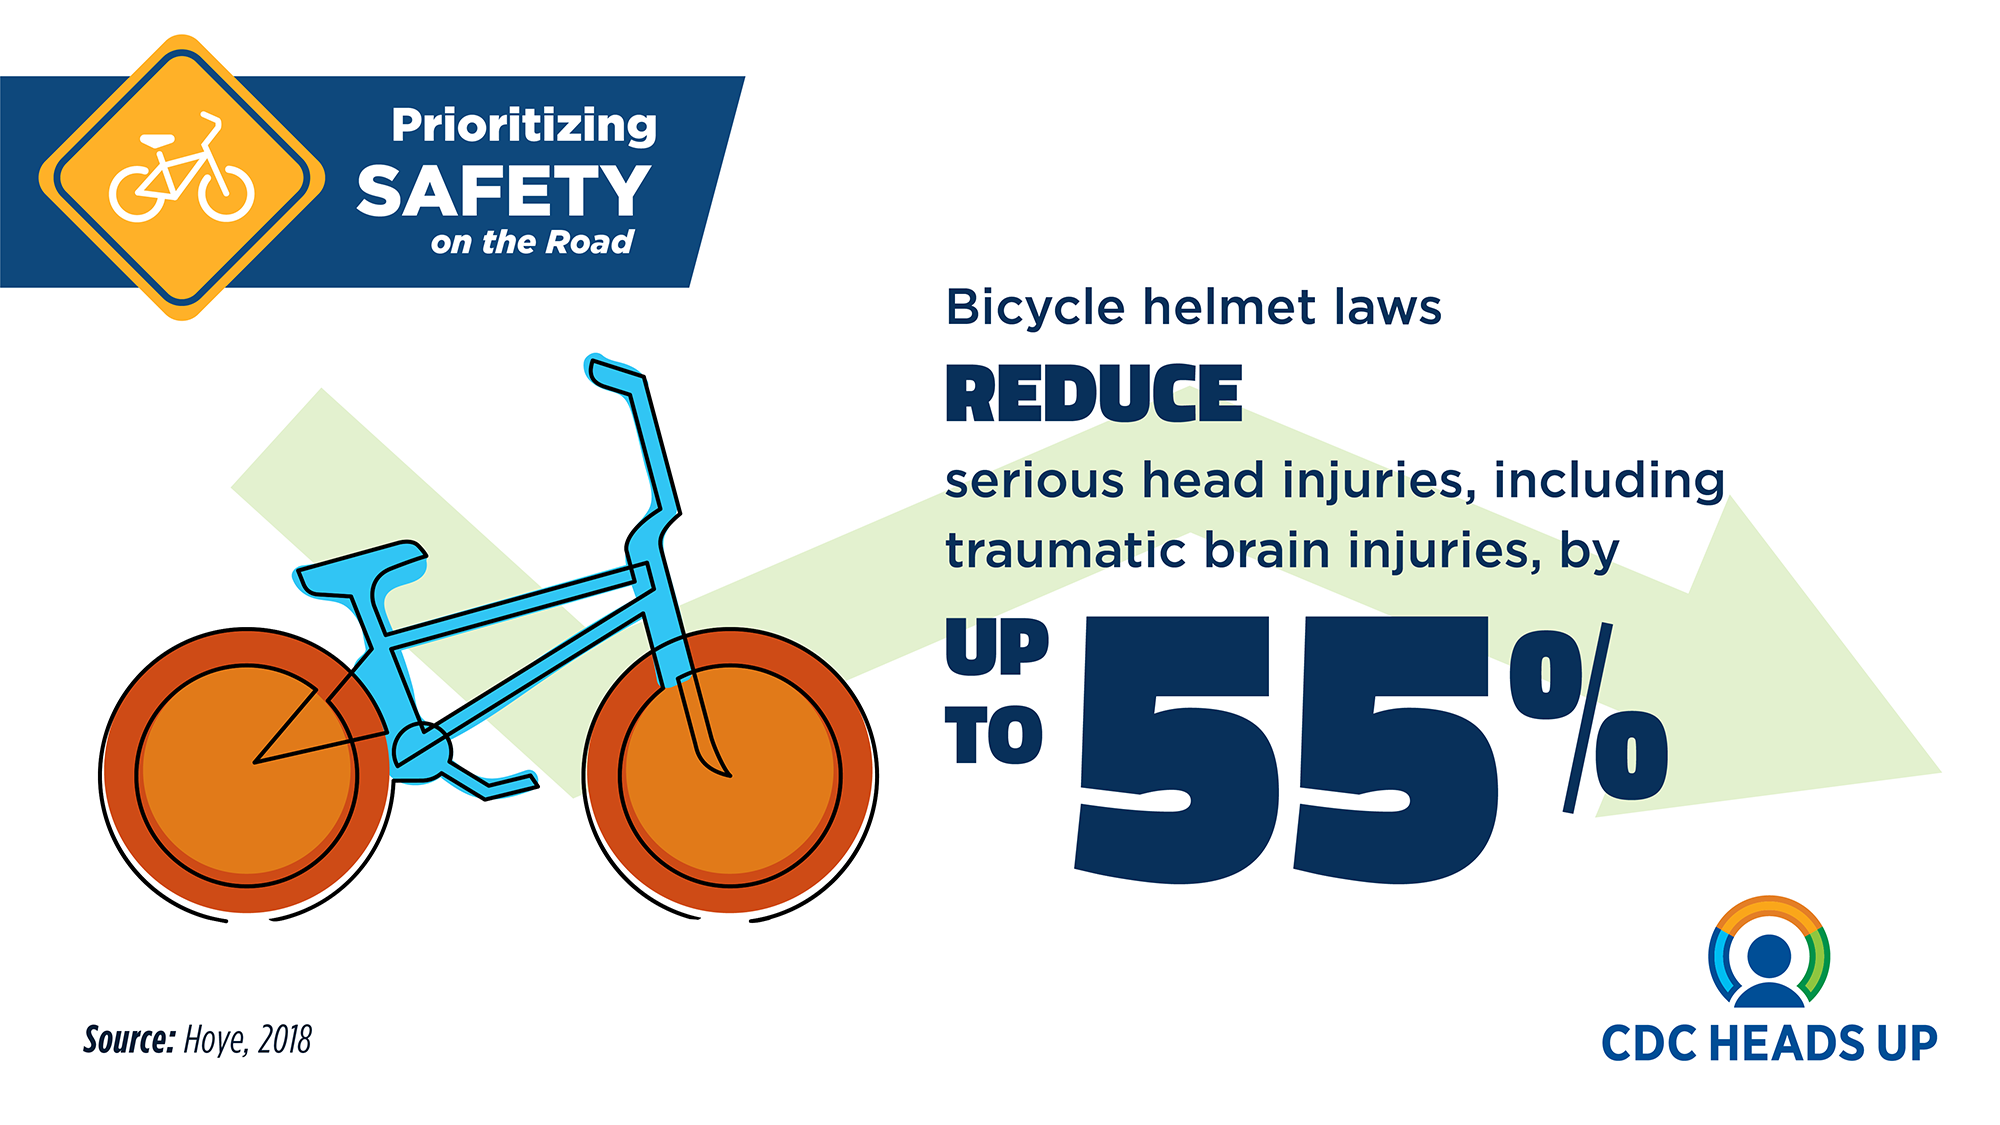 Bicycle helmet laws reduce serious head injuries, including traumatic brain injuries, by up to 55%.